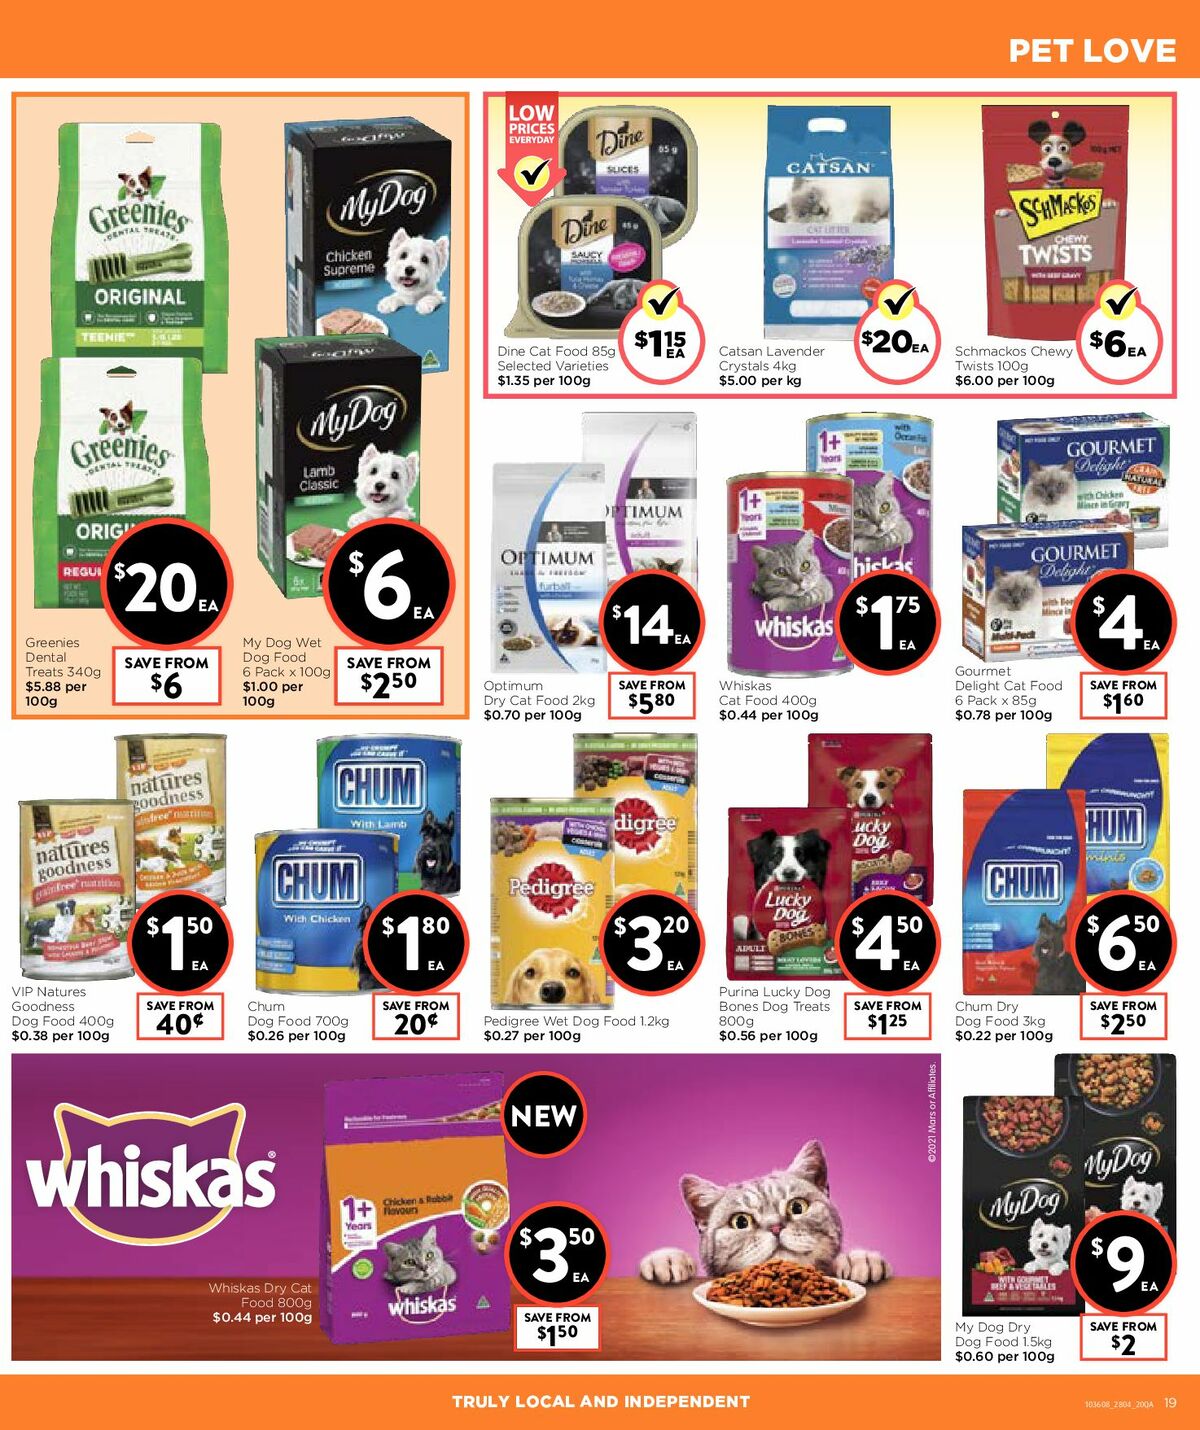 FoodWorks Supermarket Catalogues from 28 April